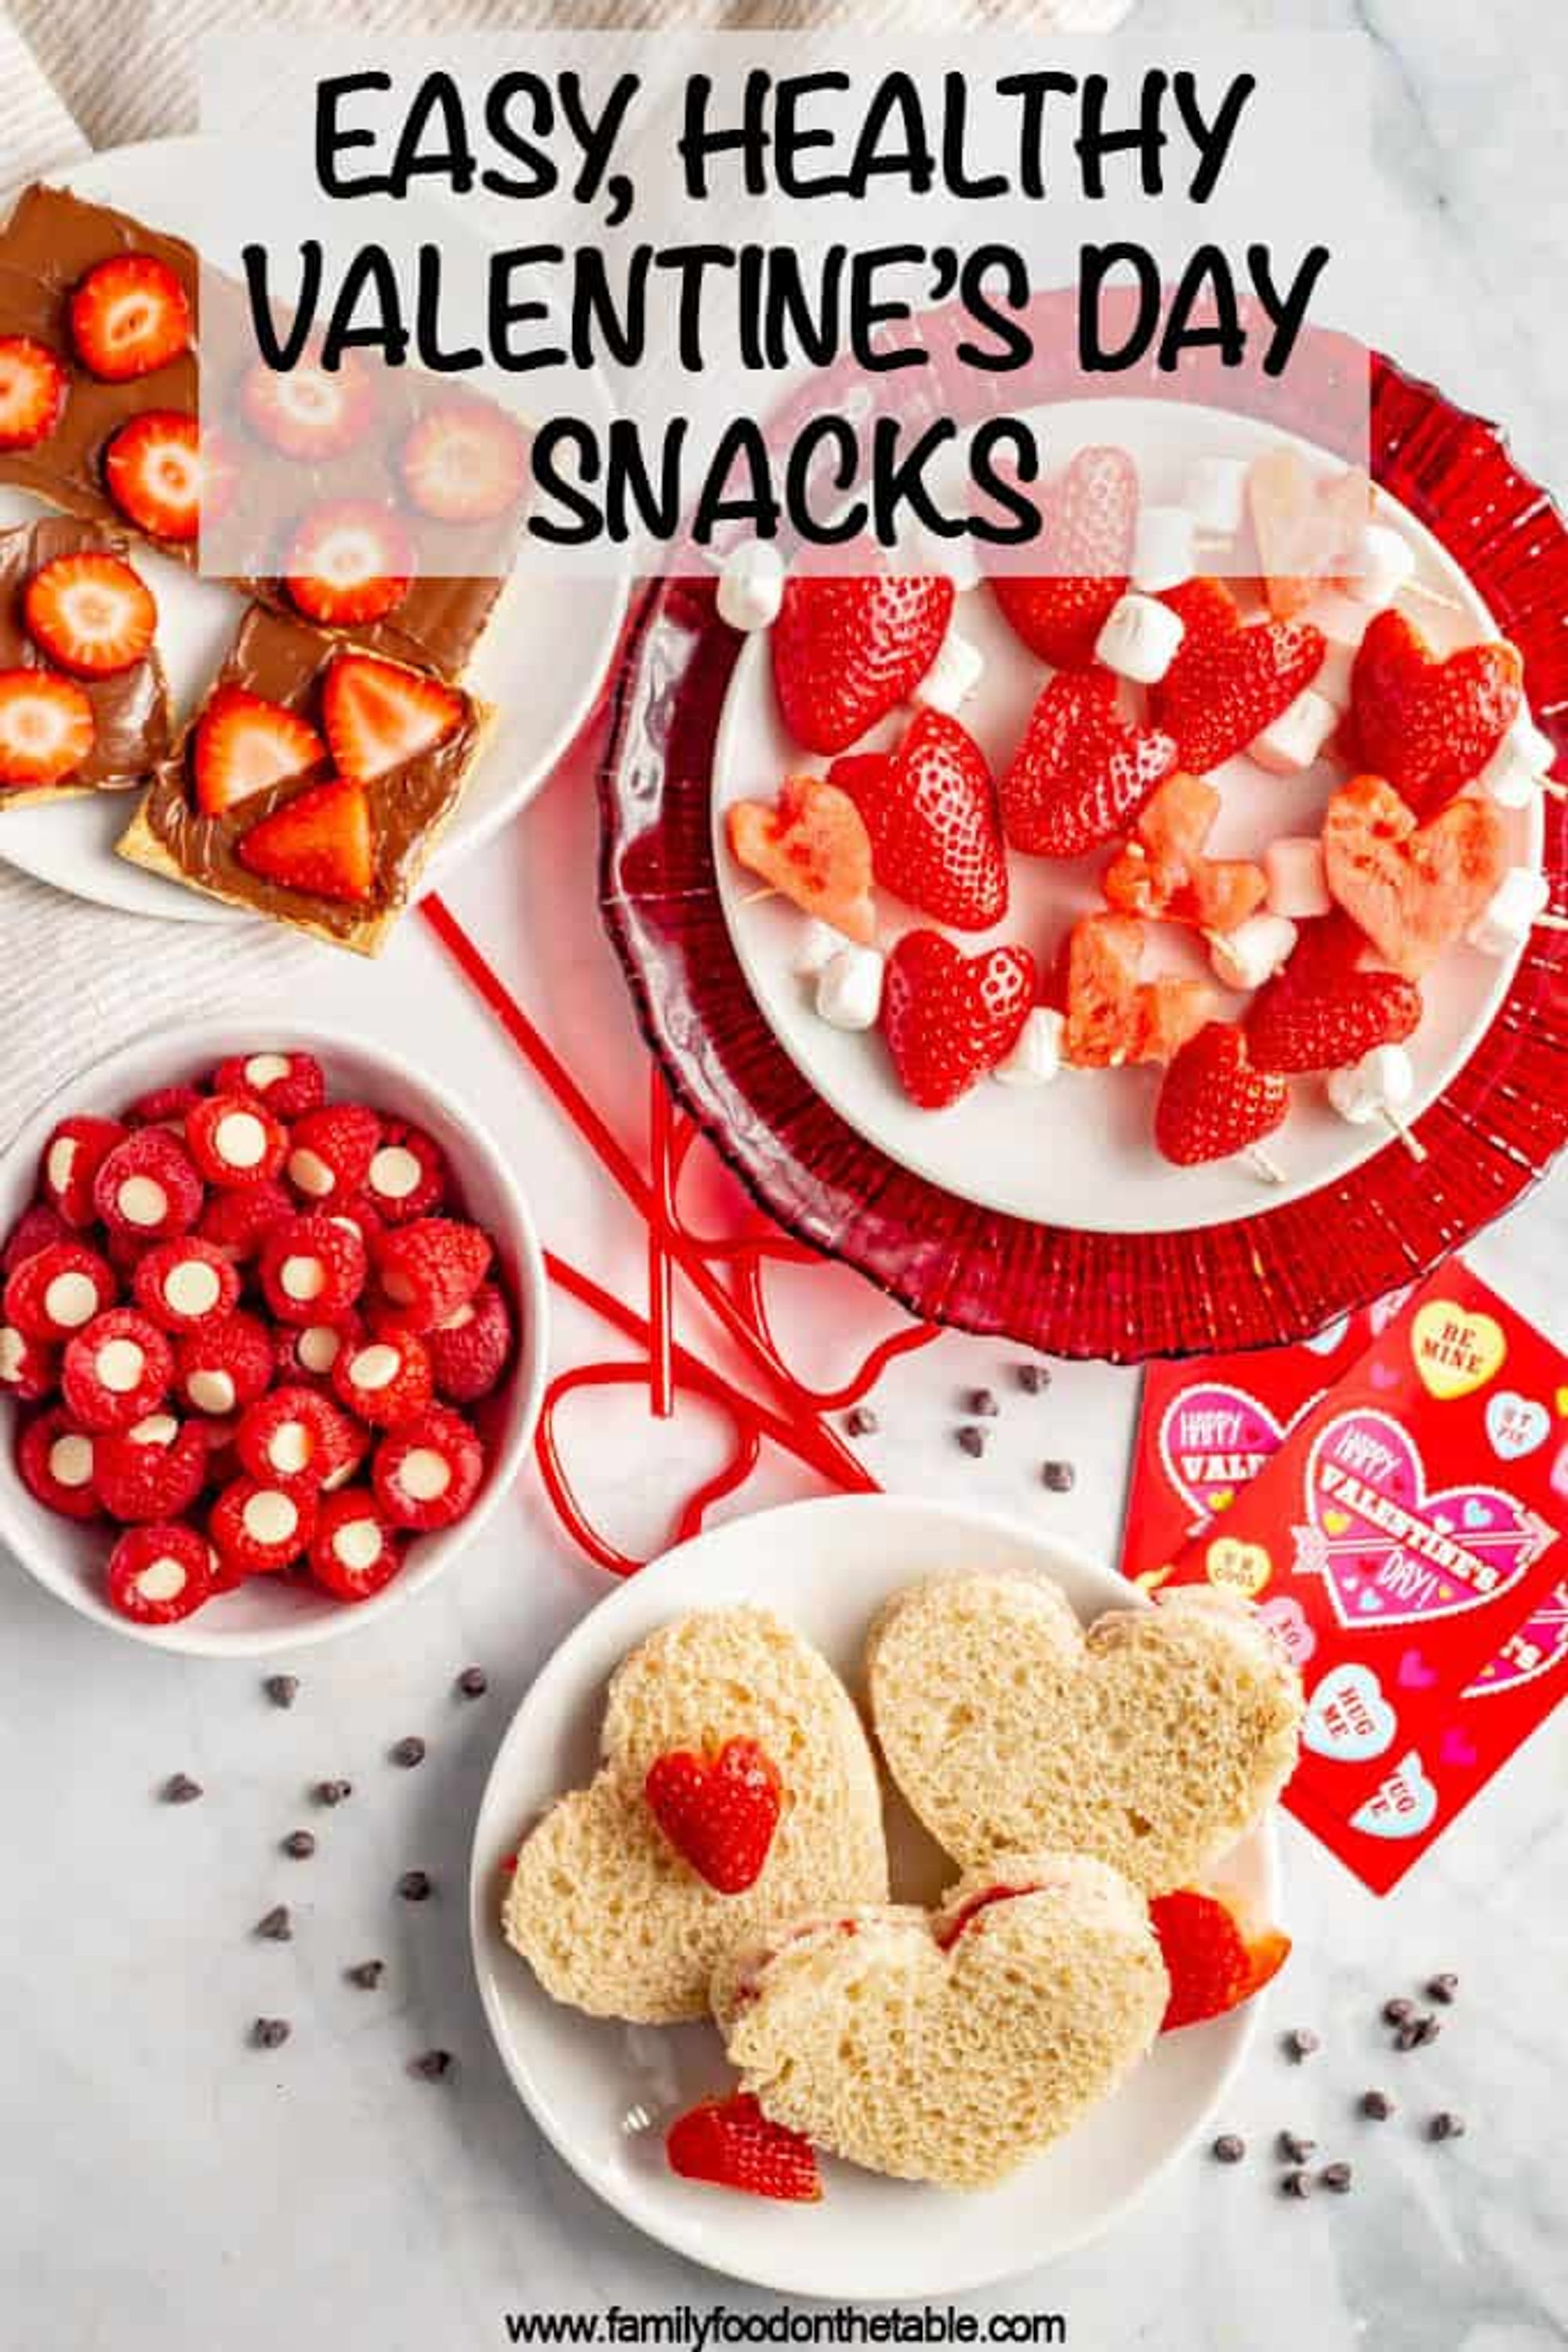 Healthy Valentine's Day Snacks - 33 ideas - Family Food on the Table